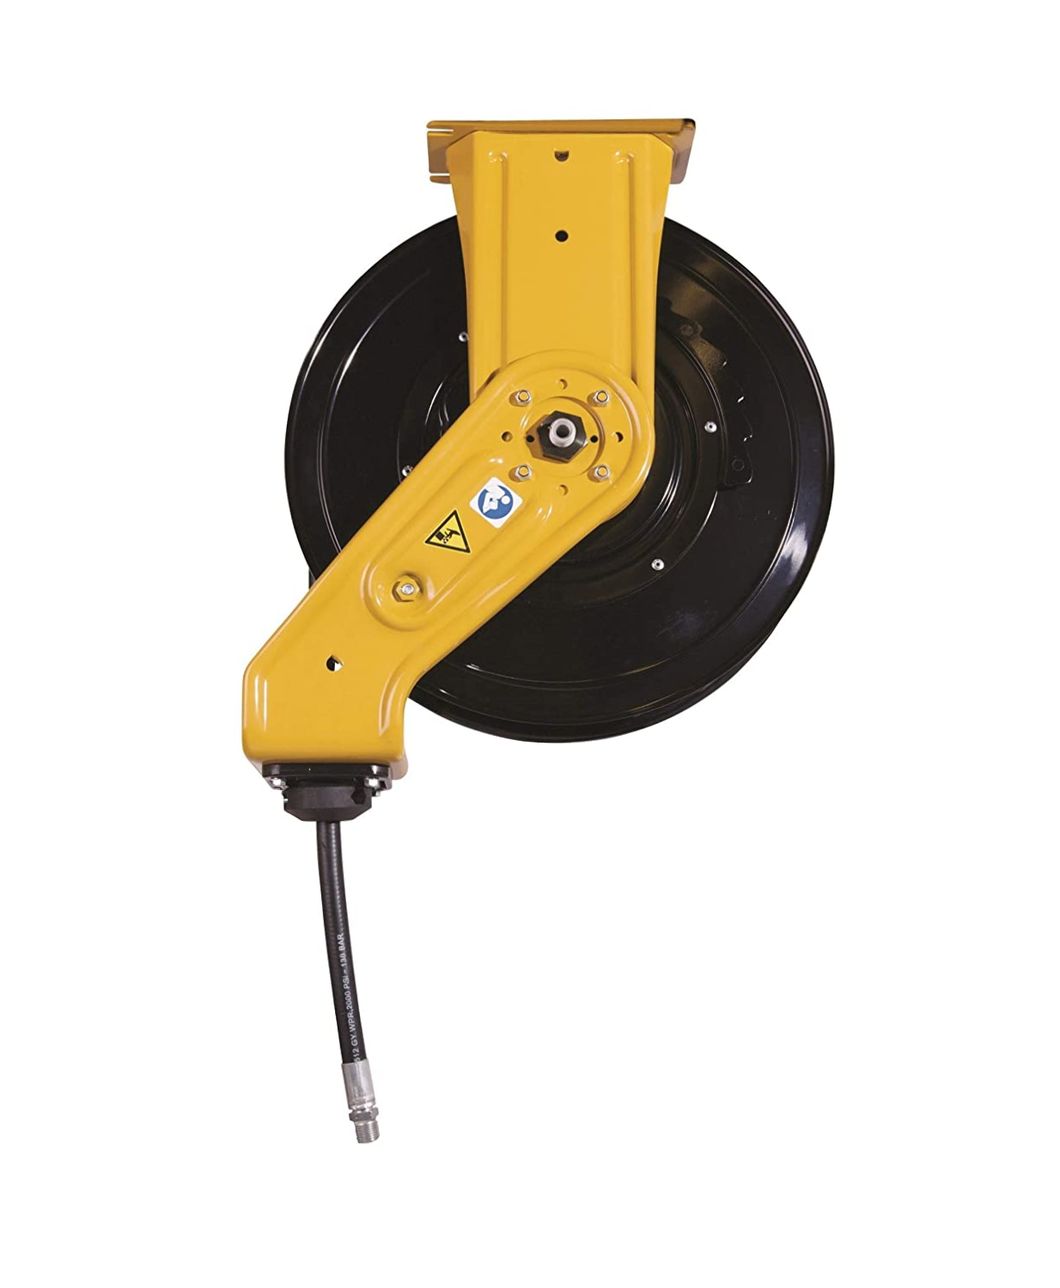 Graco SD20 Series Hose Reel w/ 3/8 in. X 65 ft. Hose - Air/Water - Yellow (Overhead Mount)